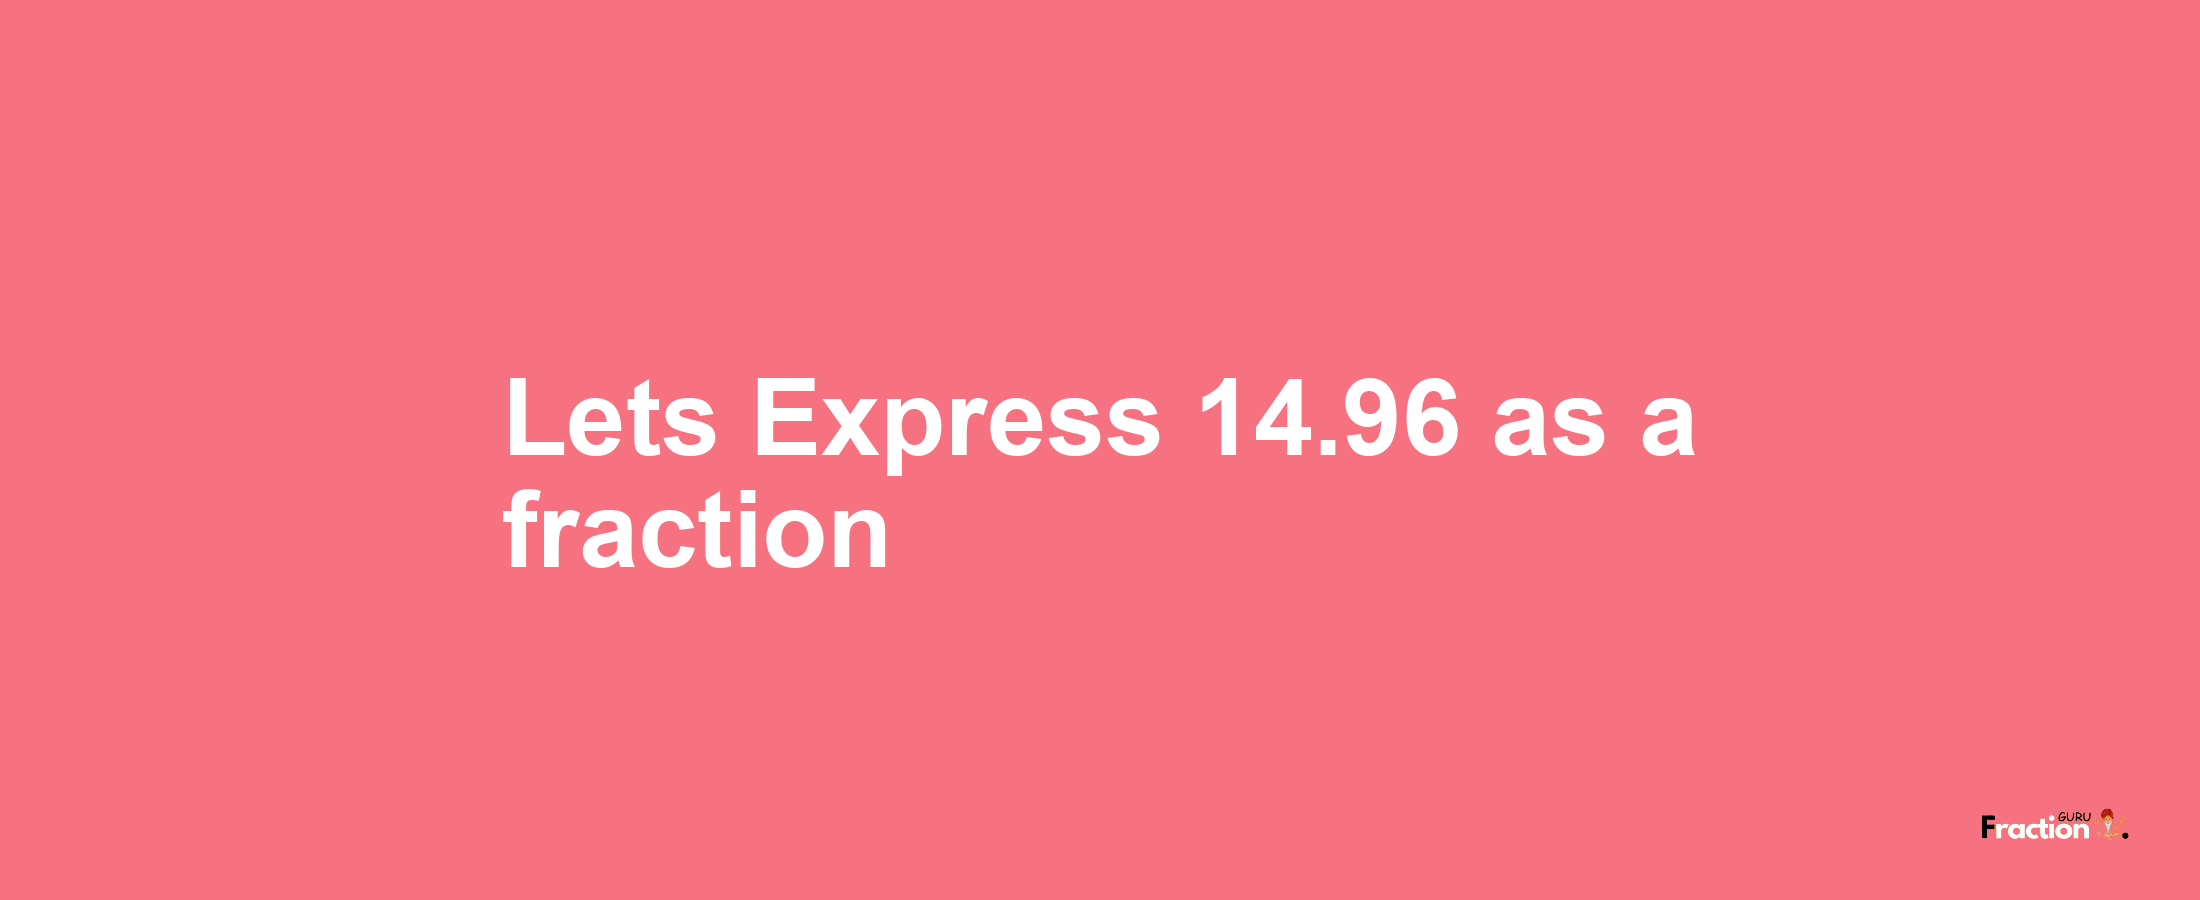 Lets Express 14.96 as afraction